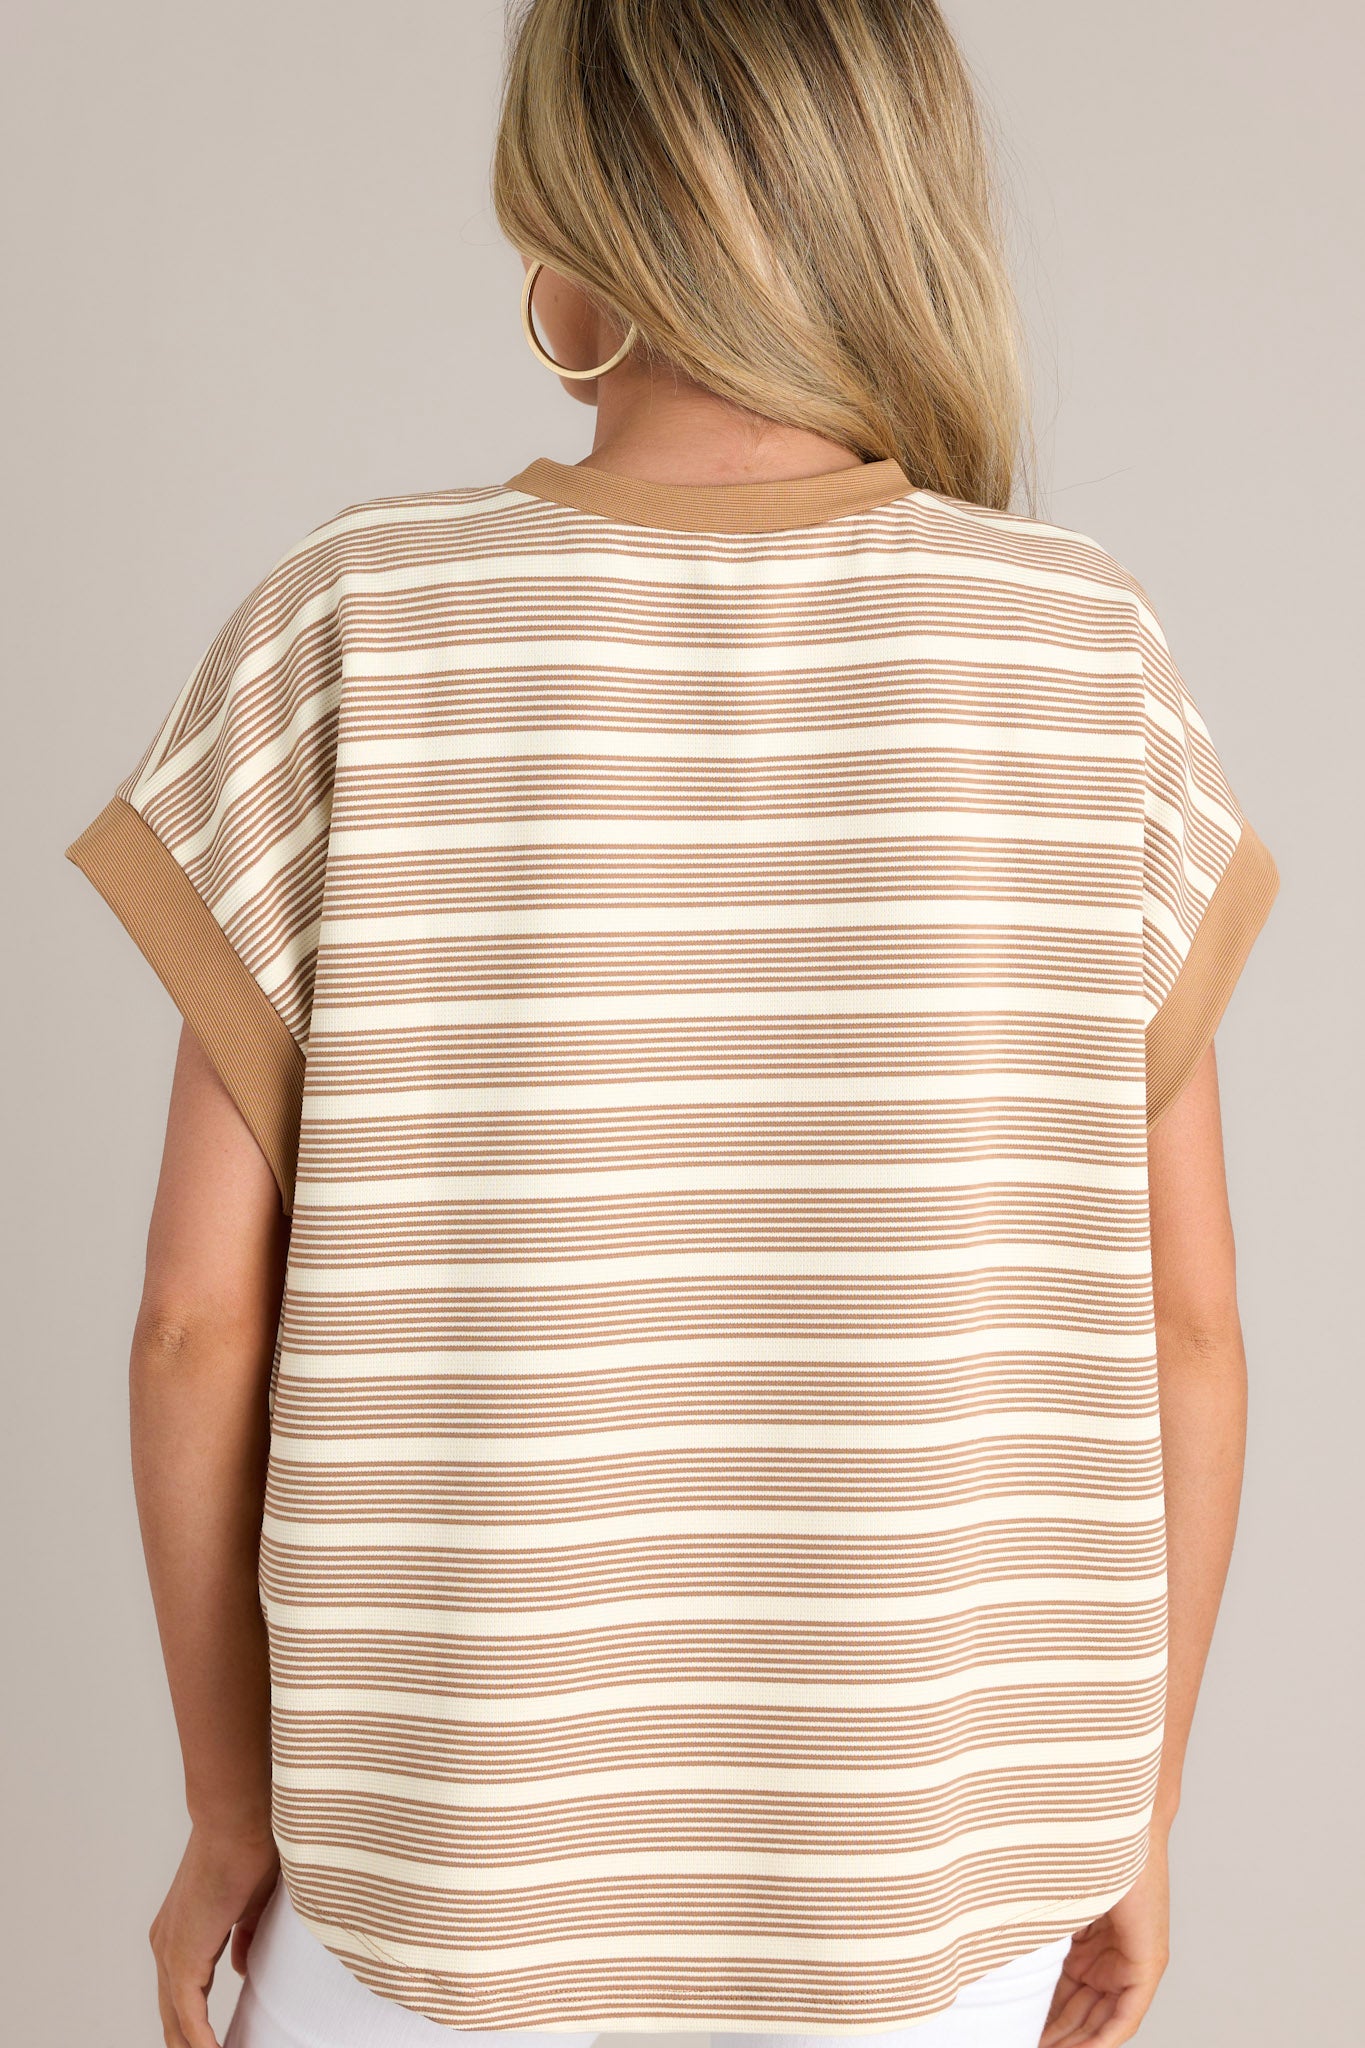 Back view of this camel stripe top that features a crew neckline, a unique stripe pattern, and thick sleeve hemlines.